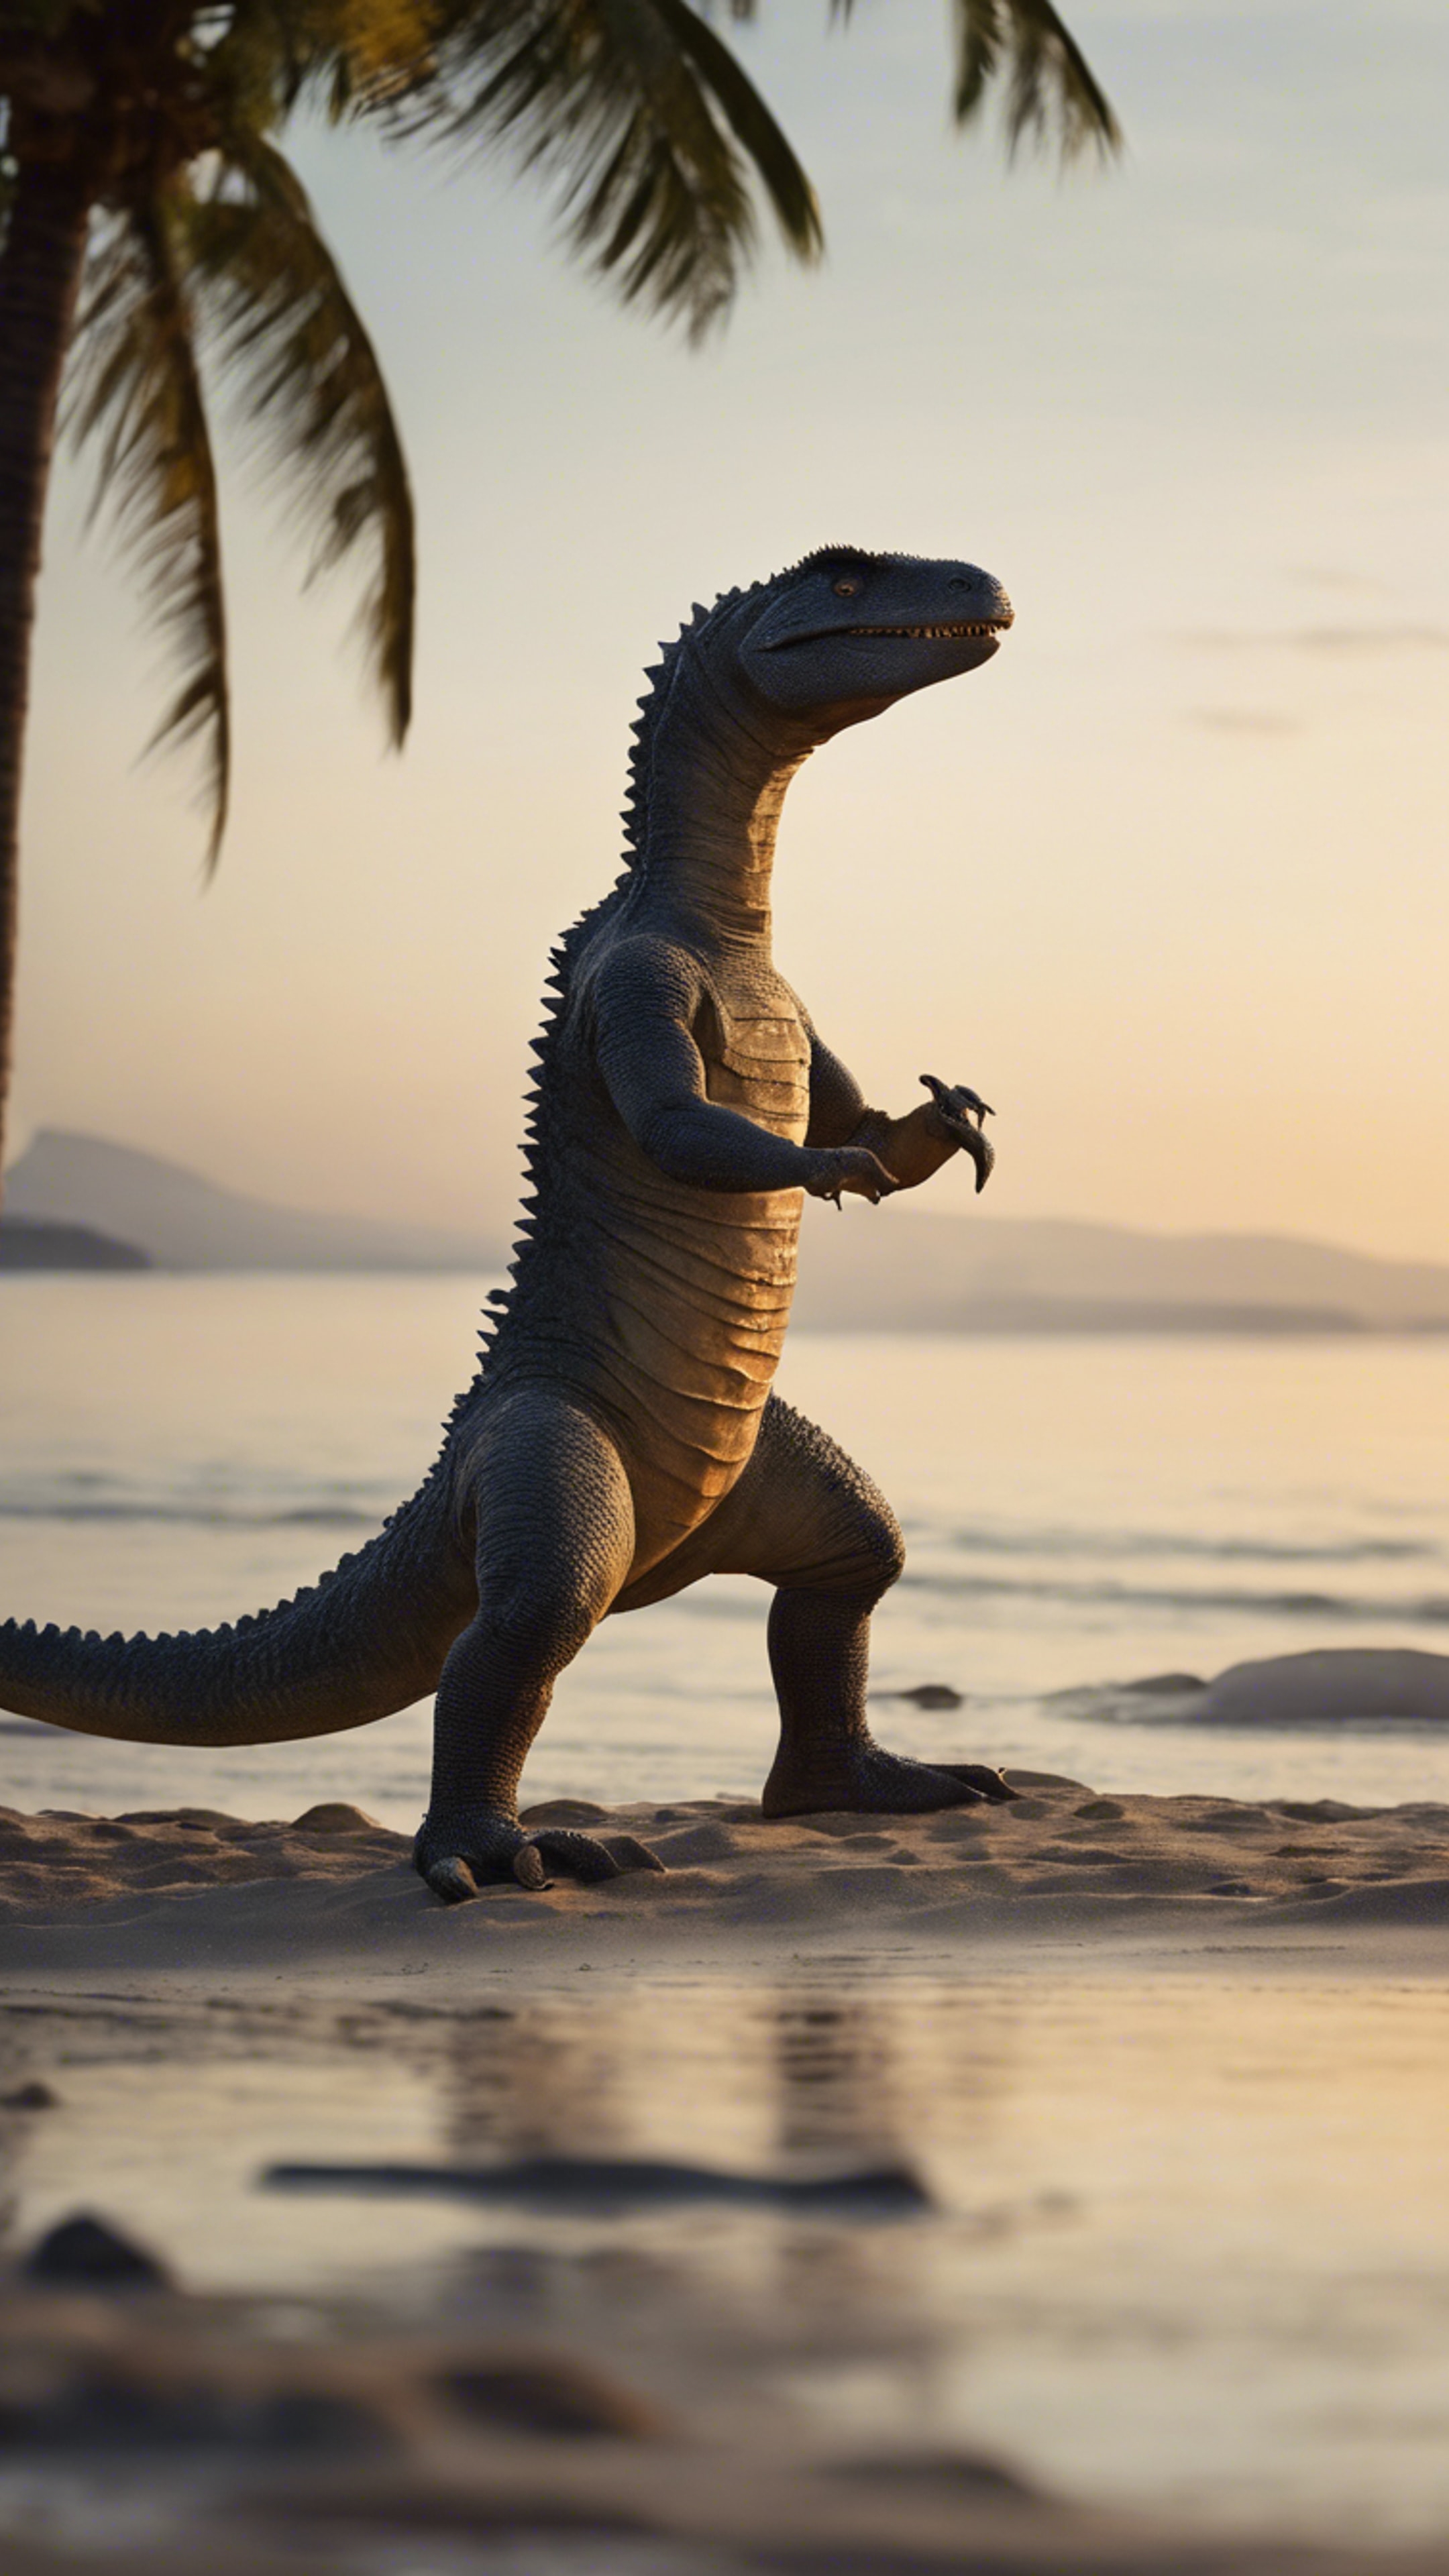 A tranquil scene of Thescelosaurus practicing Tai-Chi during the early dawn on a peaceful beach. Tapet[4138bc2c7b604ba6814f]